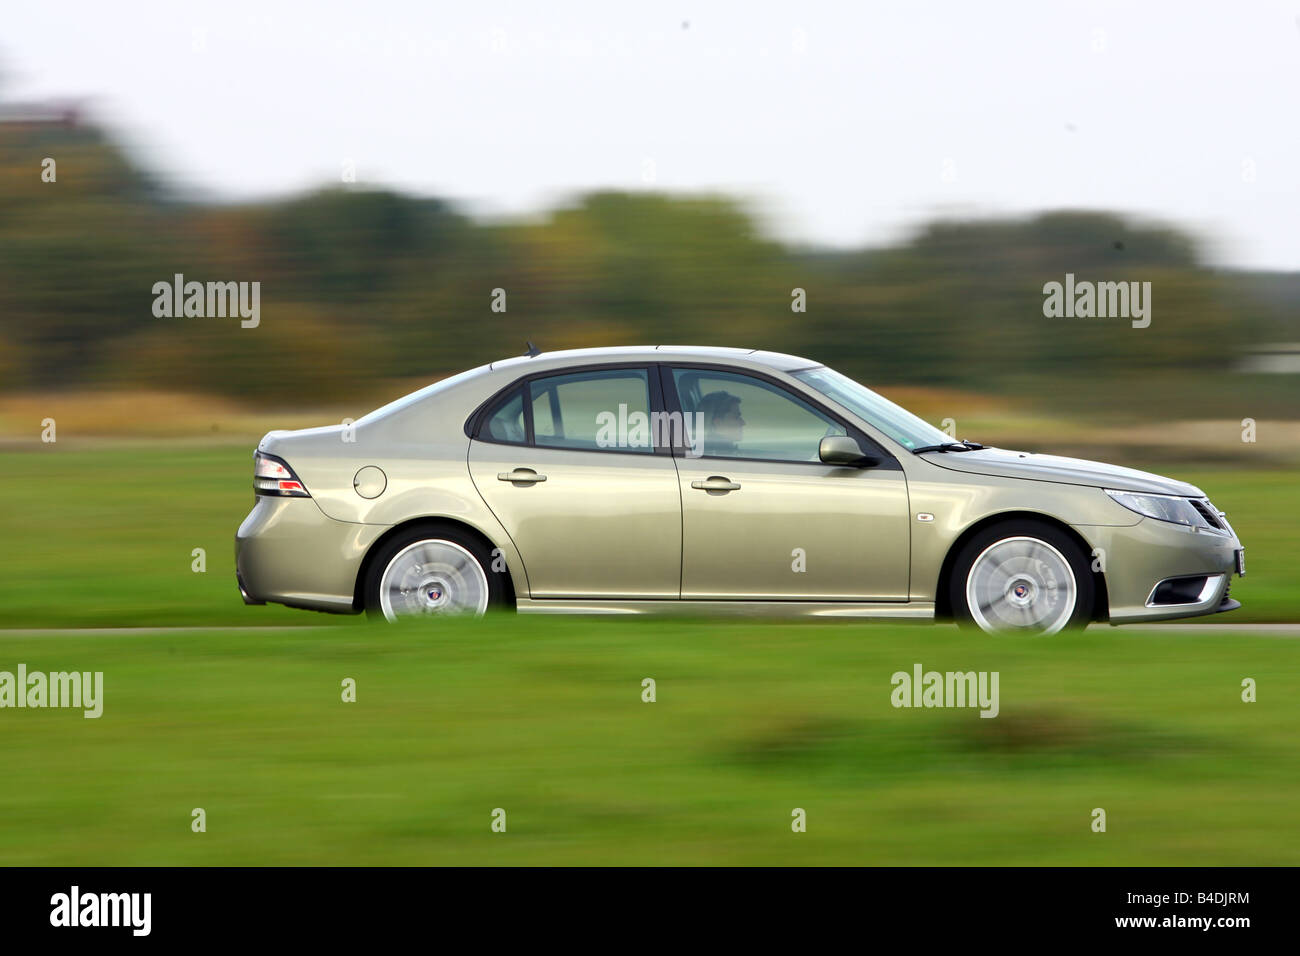 Saab 9-3 2.8 Turbo V6 Aero, model year 2007-, driving, side view, country road Stock Photo